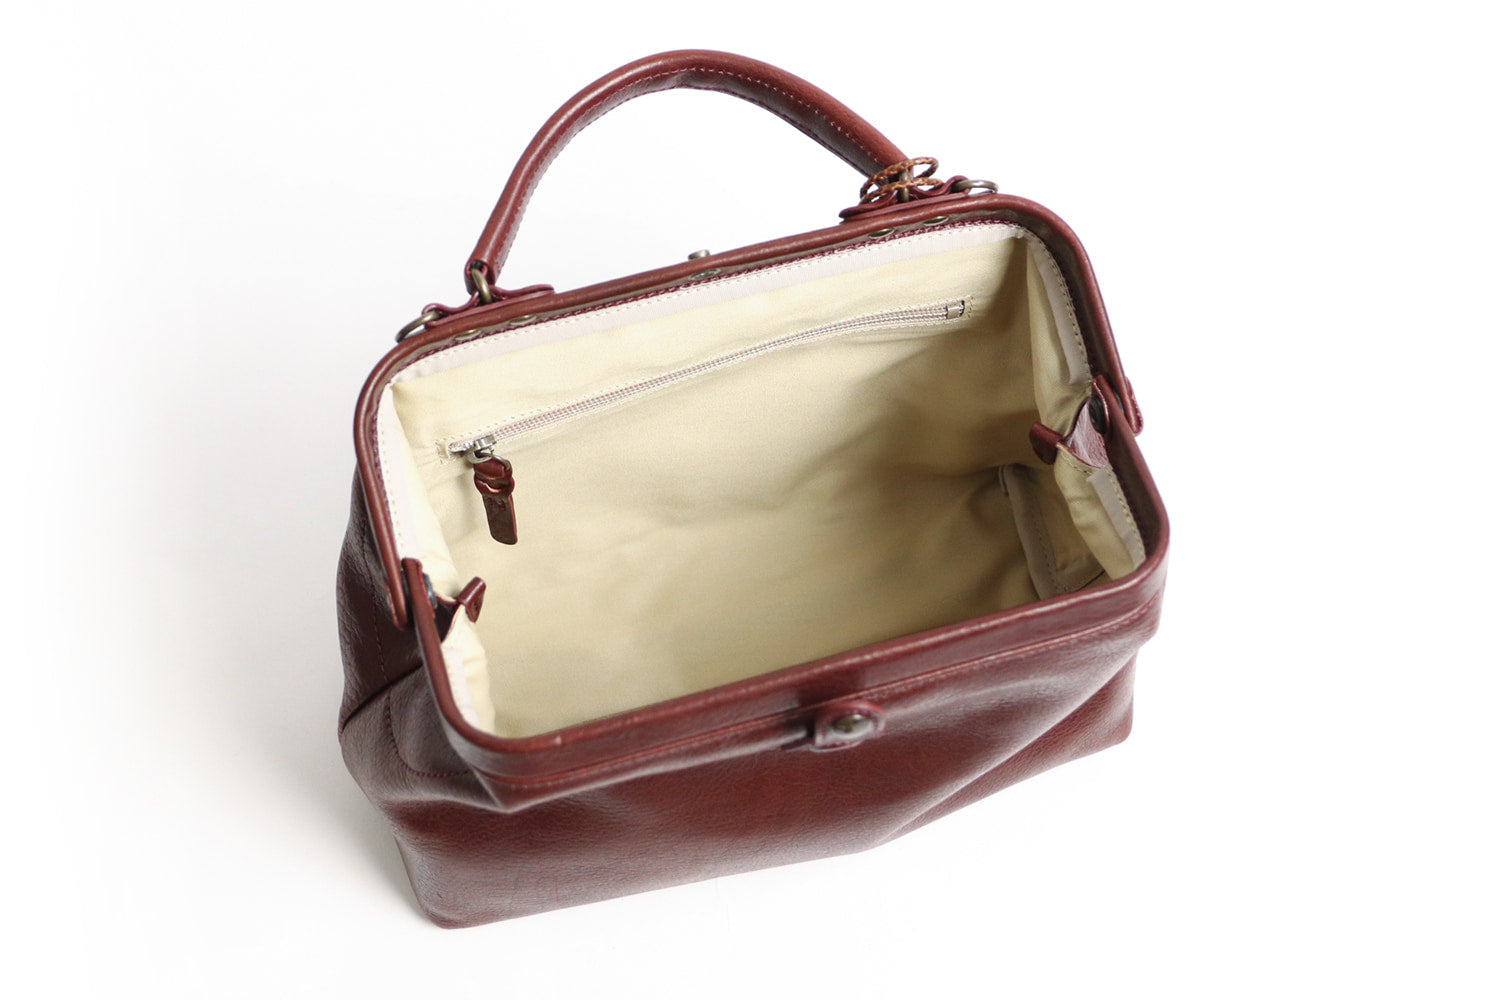 Atelier nuu / Lezza botanica vino 2-way mini Dulles bag made of sustainable leather dyed with wine residue 